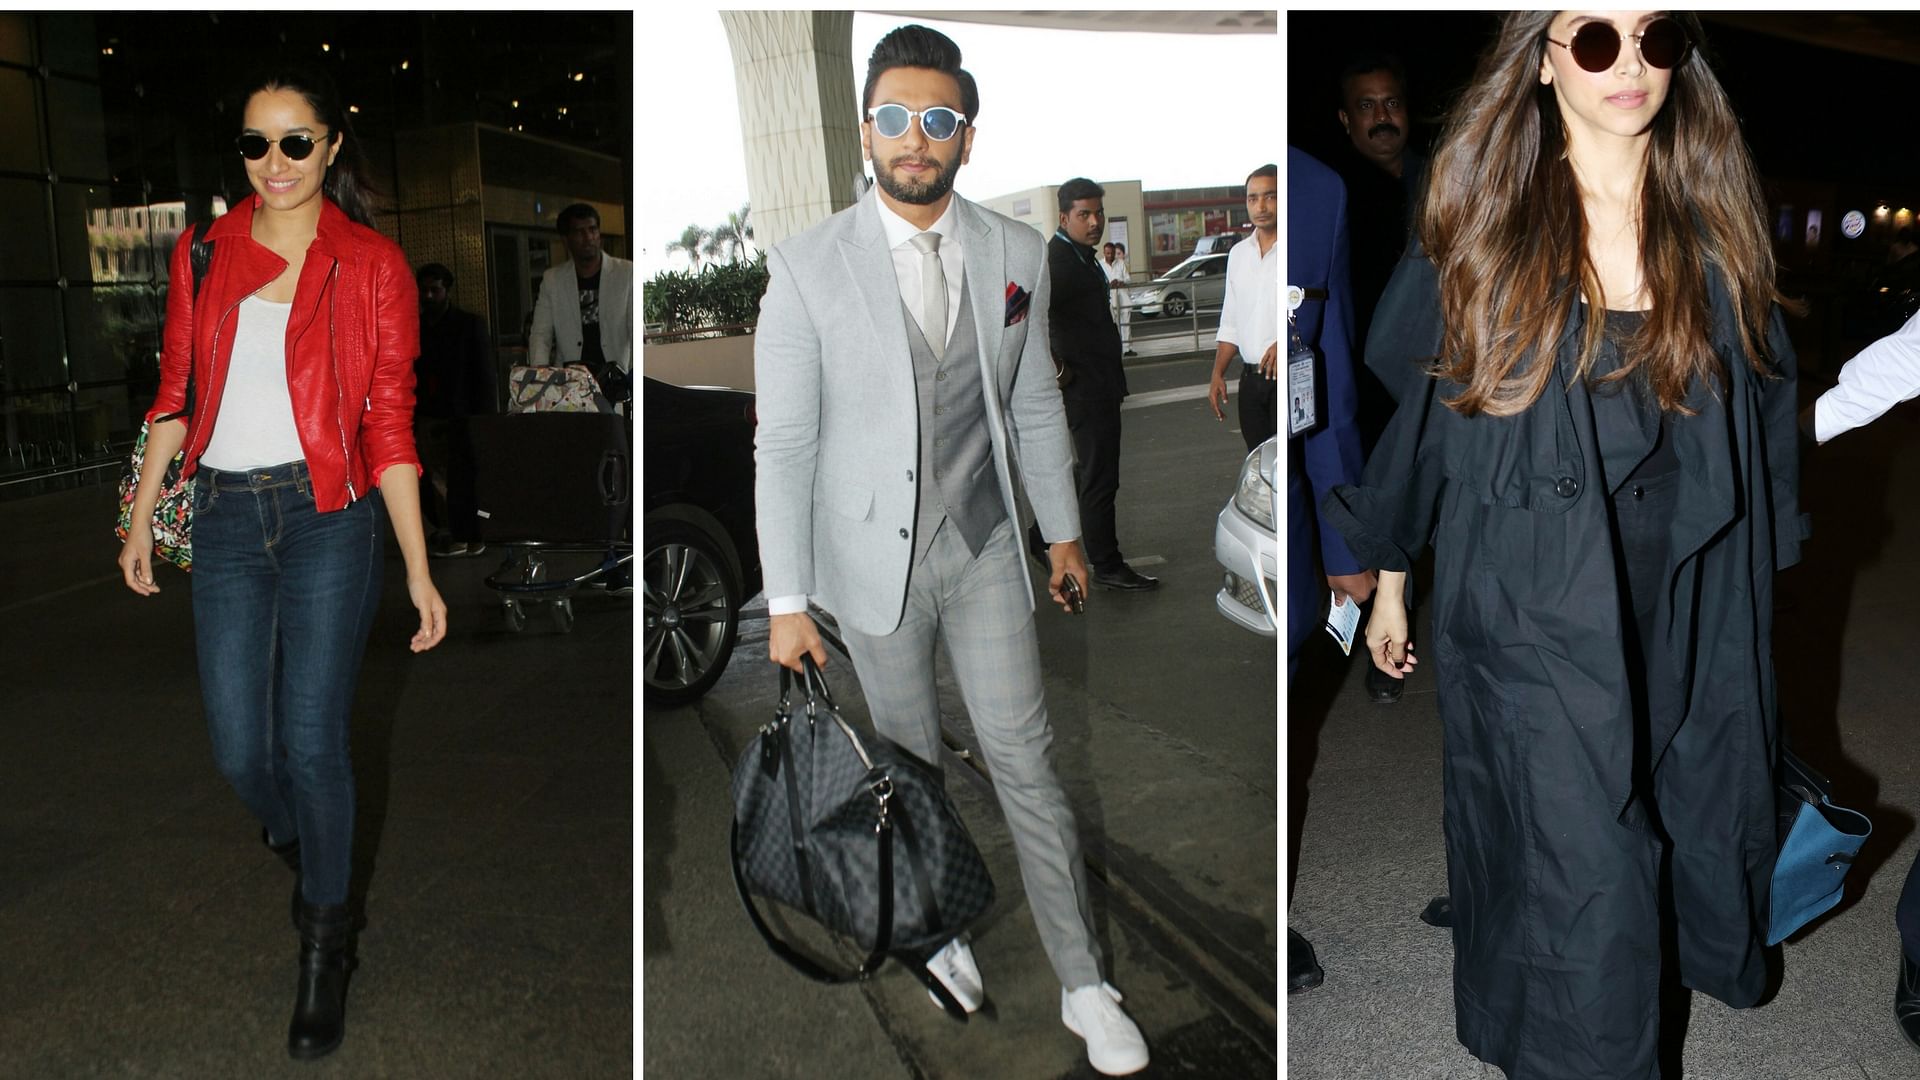 Shraddha Kapoor, Ranveer Singh and Deepika Padukone flying out of the city in style.